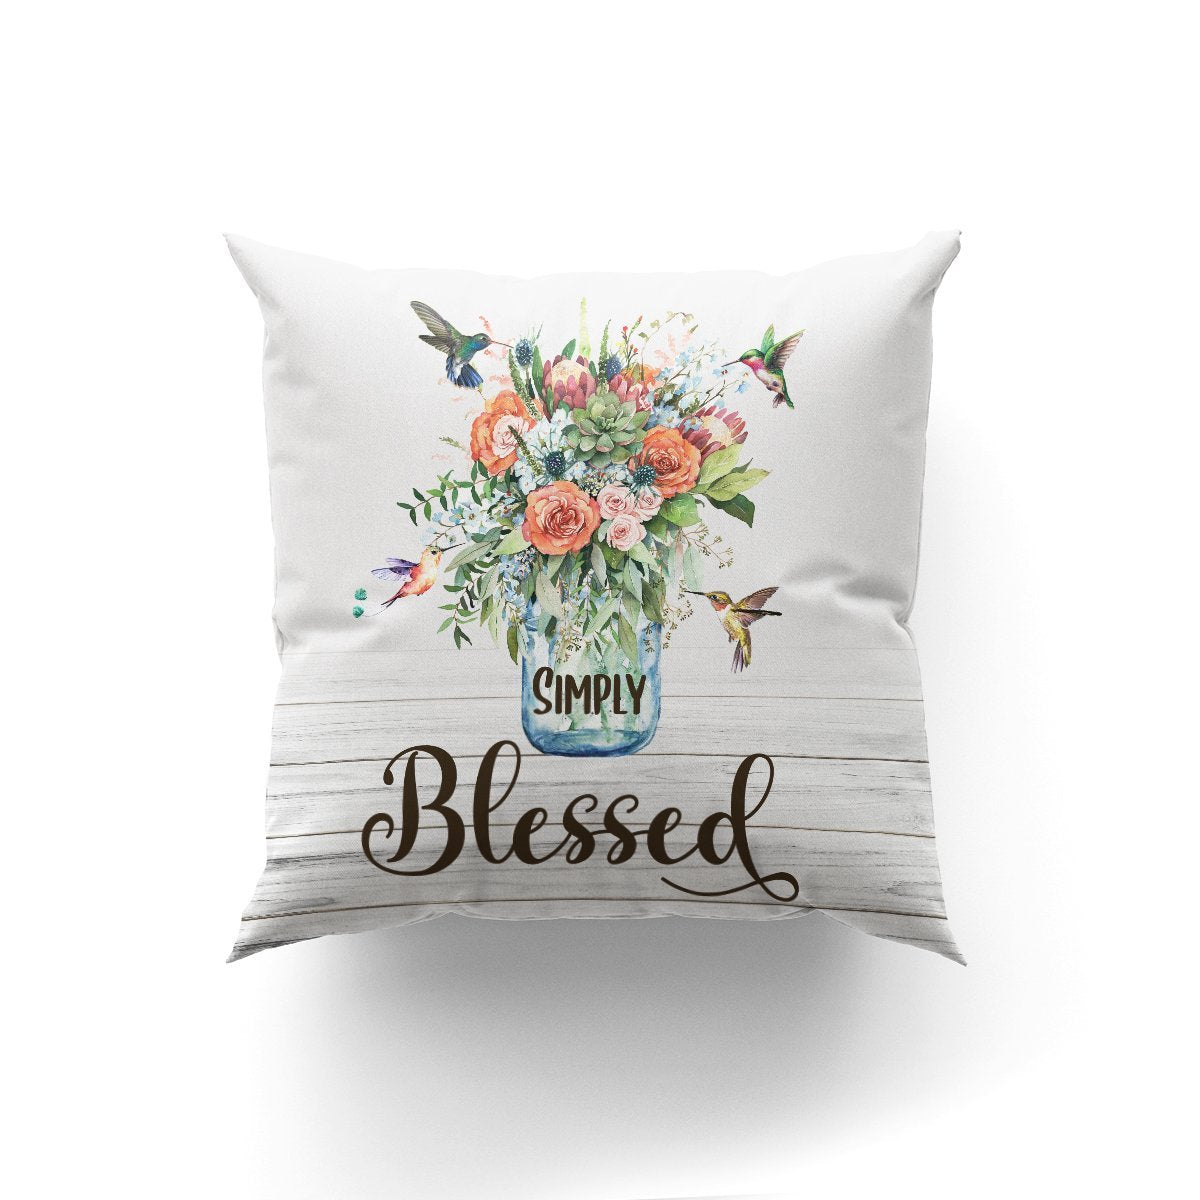 Simply Blessed - Beautiful Flower Pillowcase NUHN39 - 3